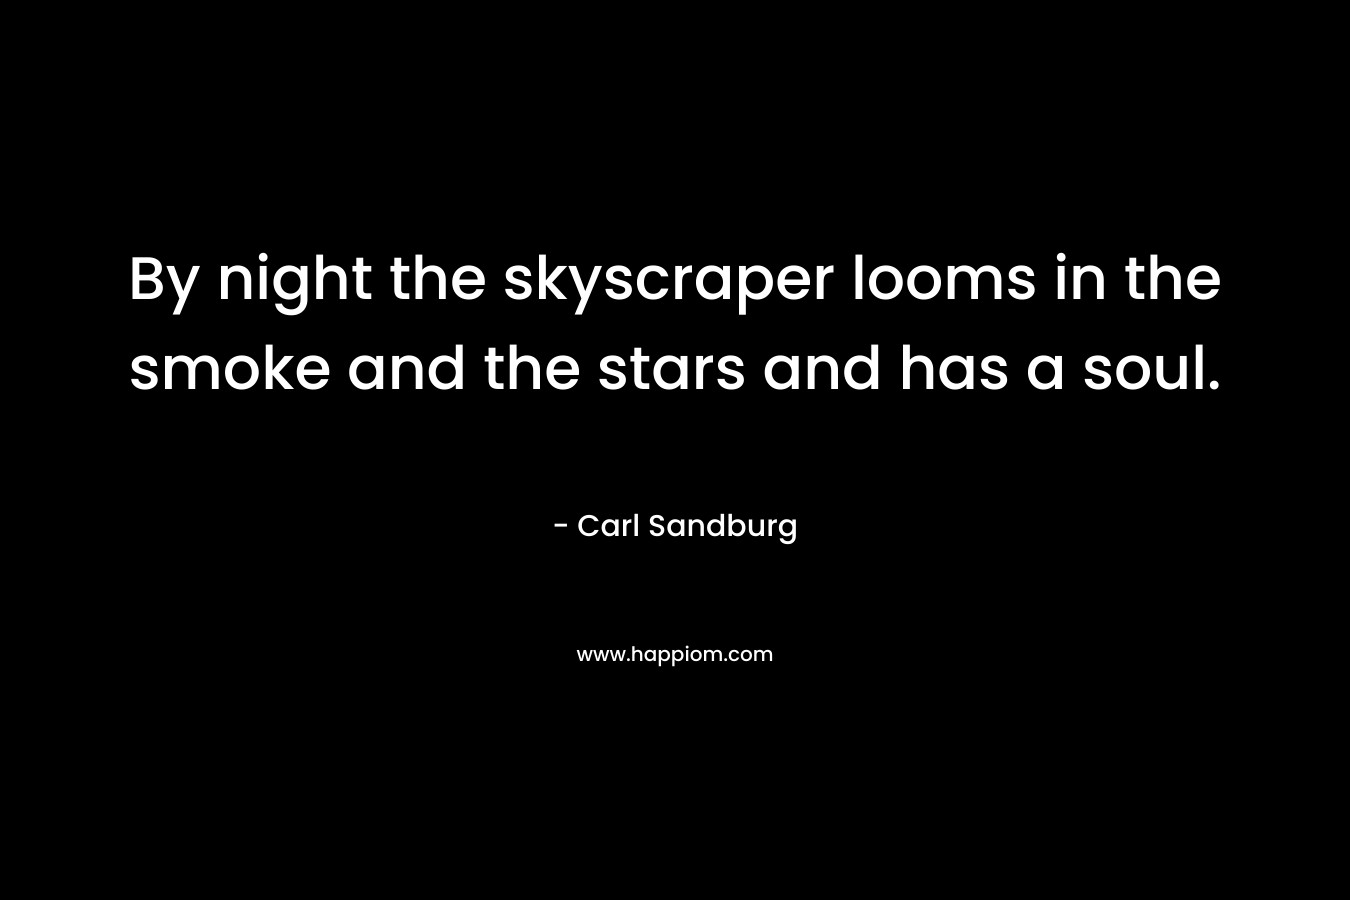 By night the skyscraper looms in the smoke and the stars and has a soul. – Carl Sandburg